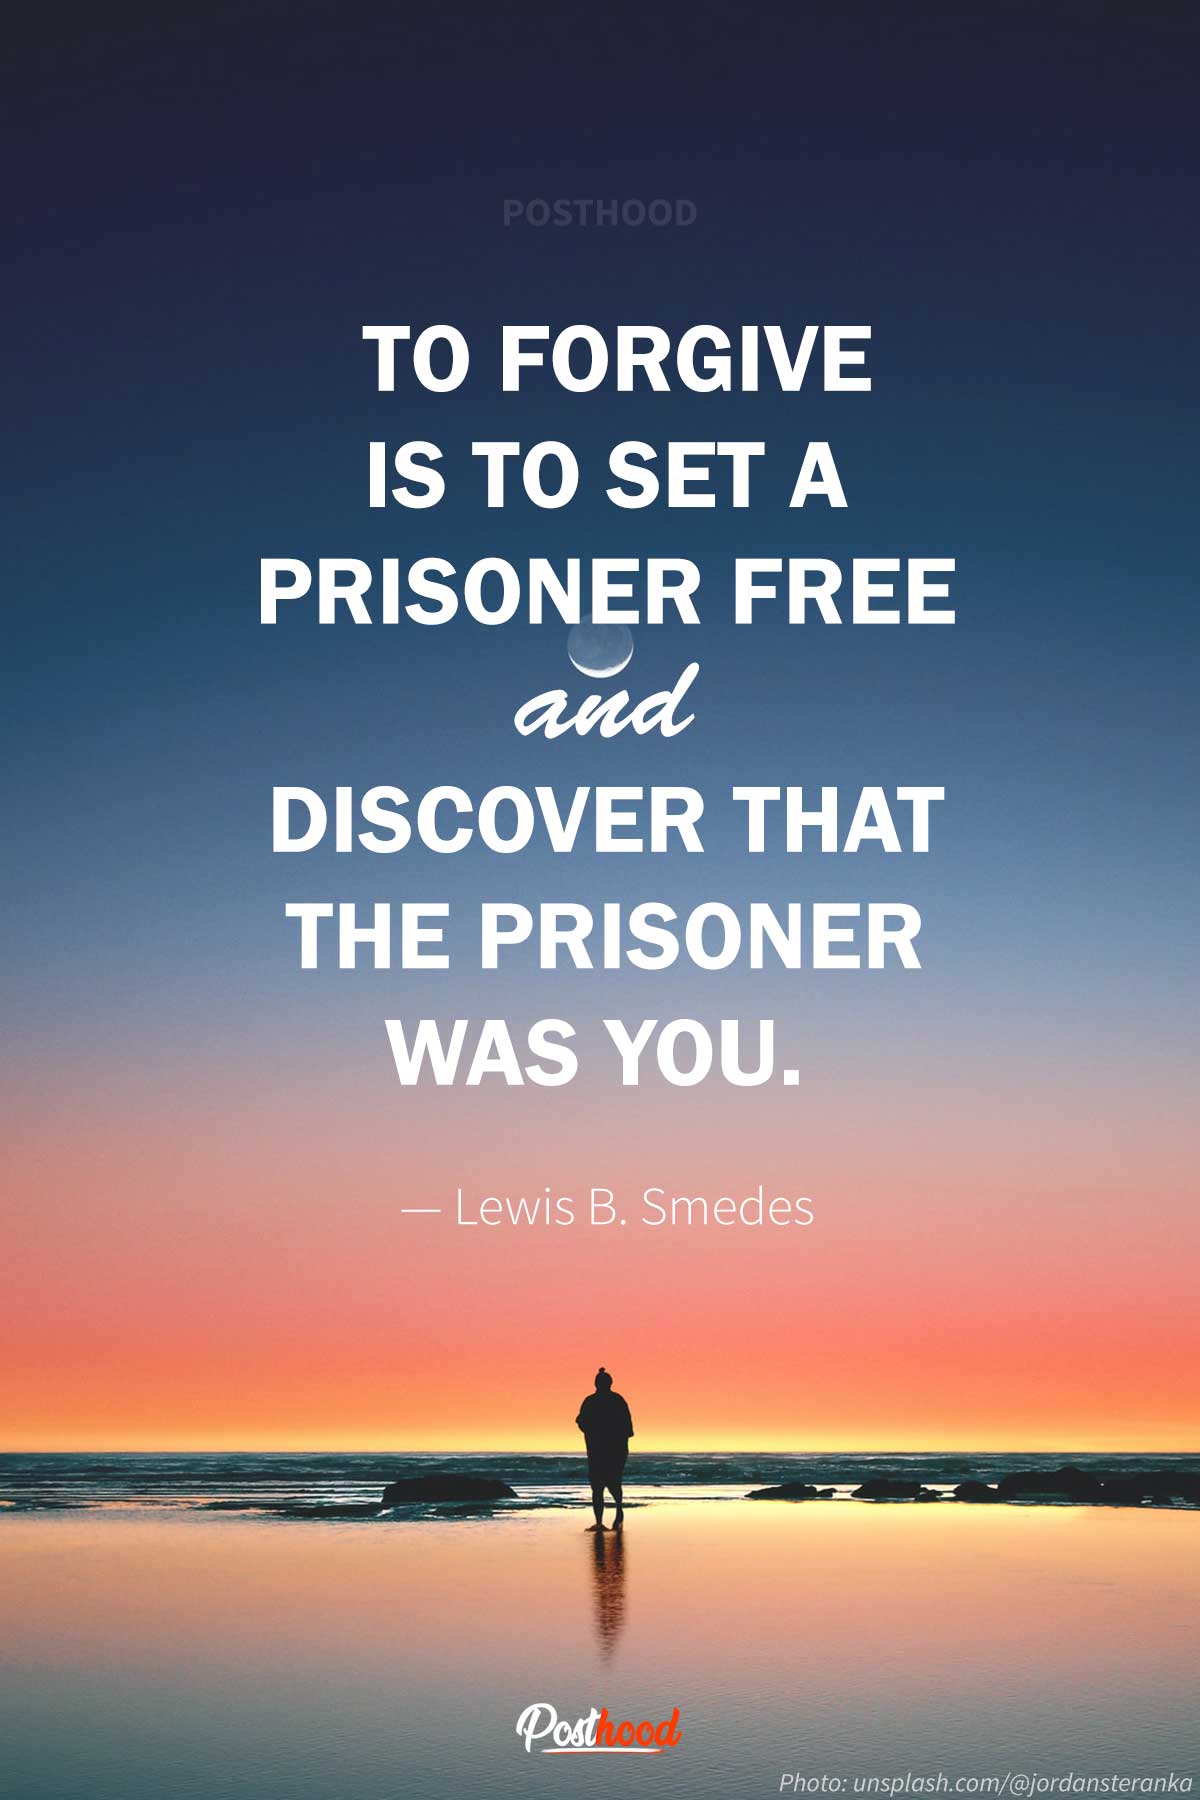 Best forgiveness quotes to set you free from lifetime regrets. Avoid making these regretful choices that can haunt you after 10 years. 